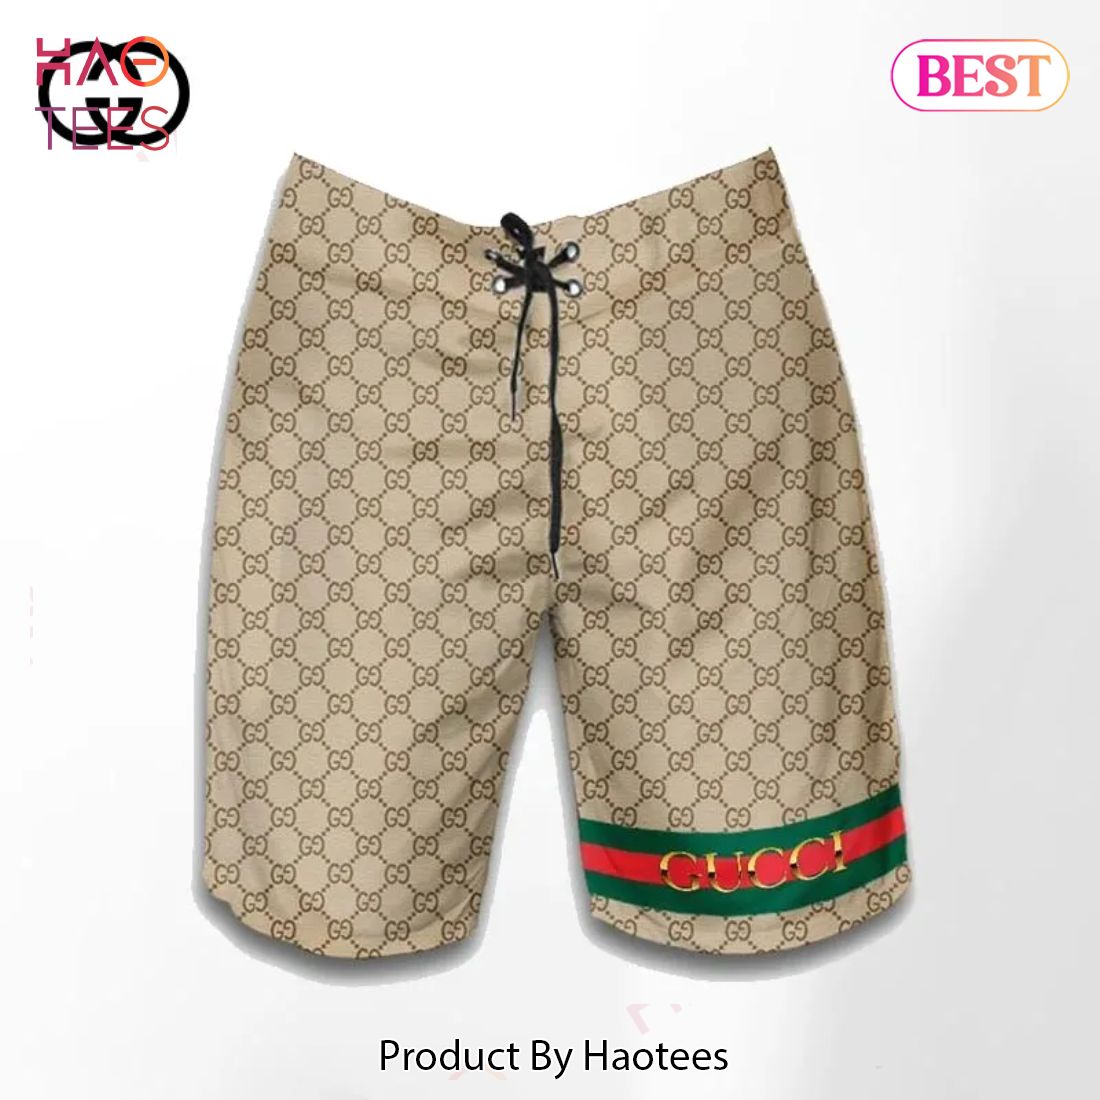 NEW FASHION] Louis Vuitton 3D Luxury All Over Print Shorts Pants For Men lv